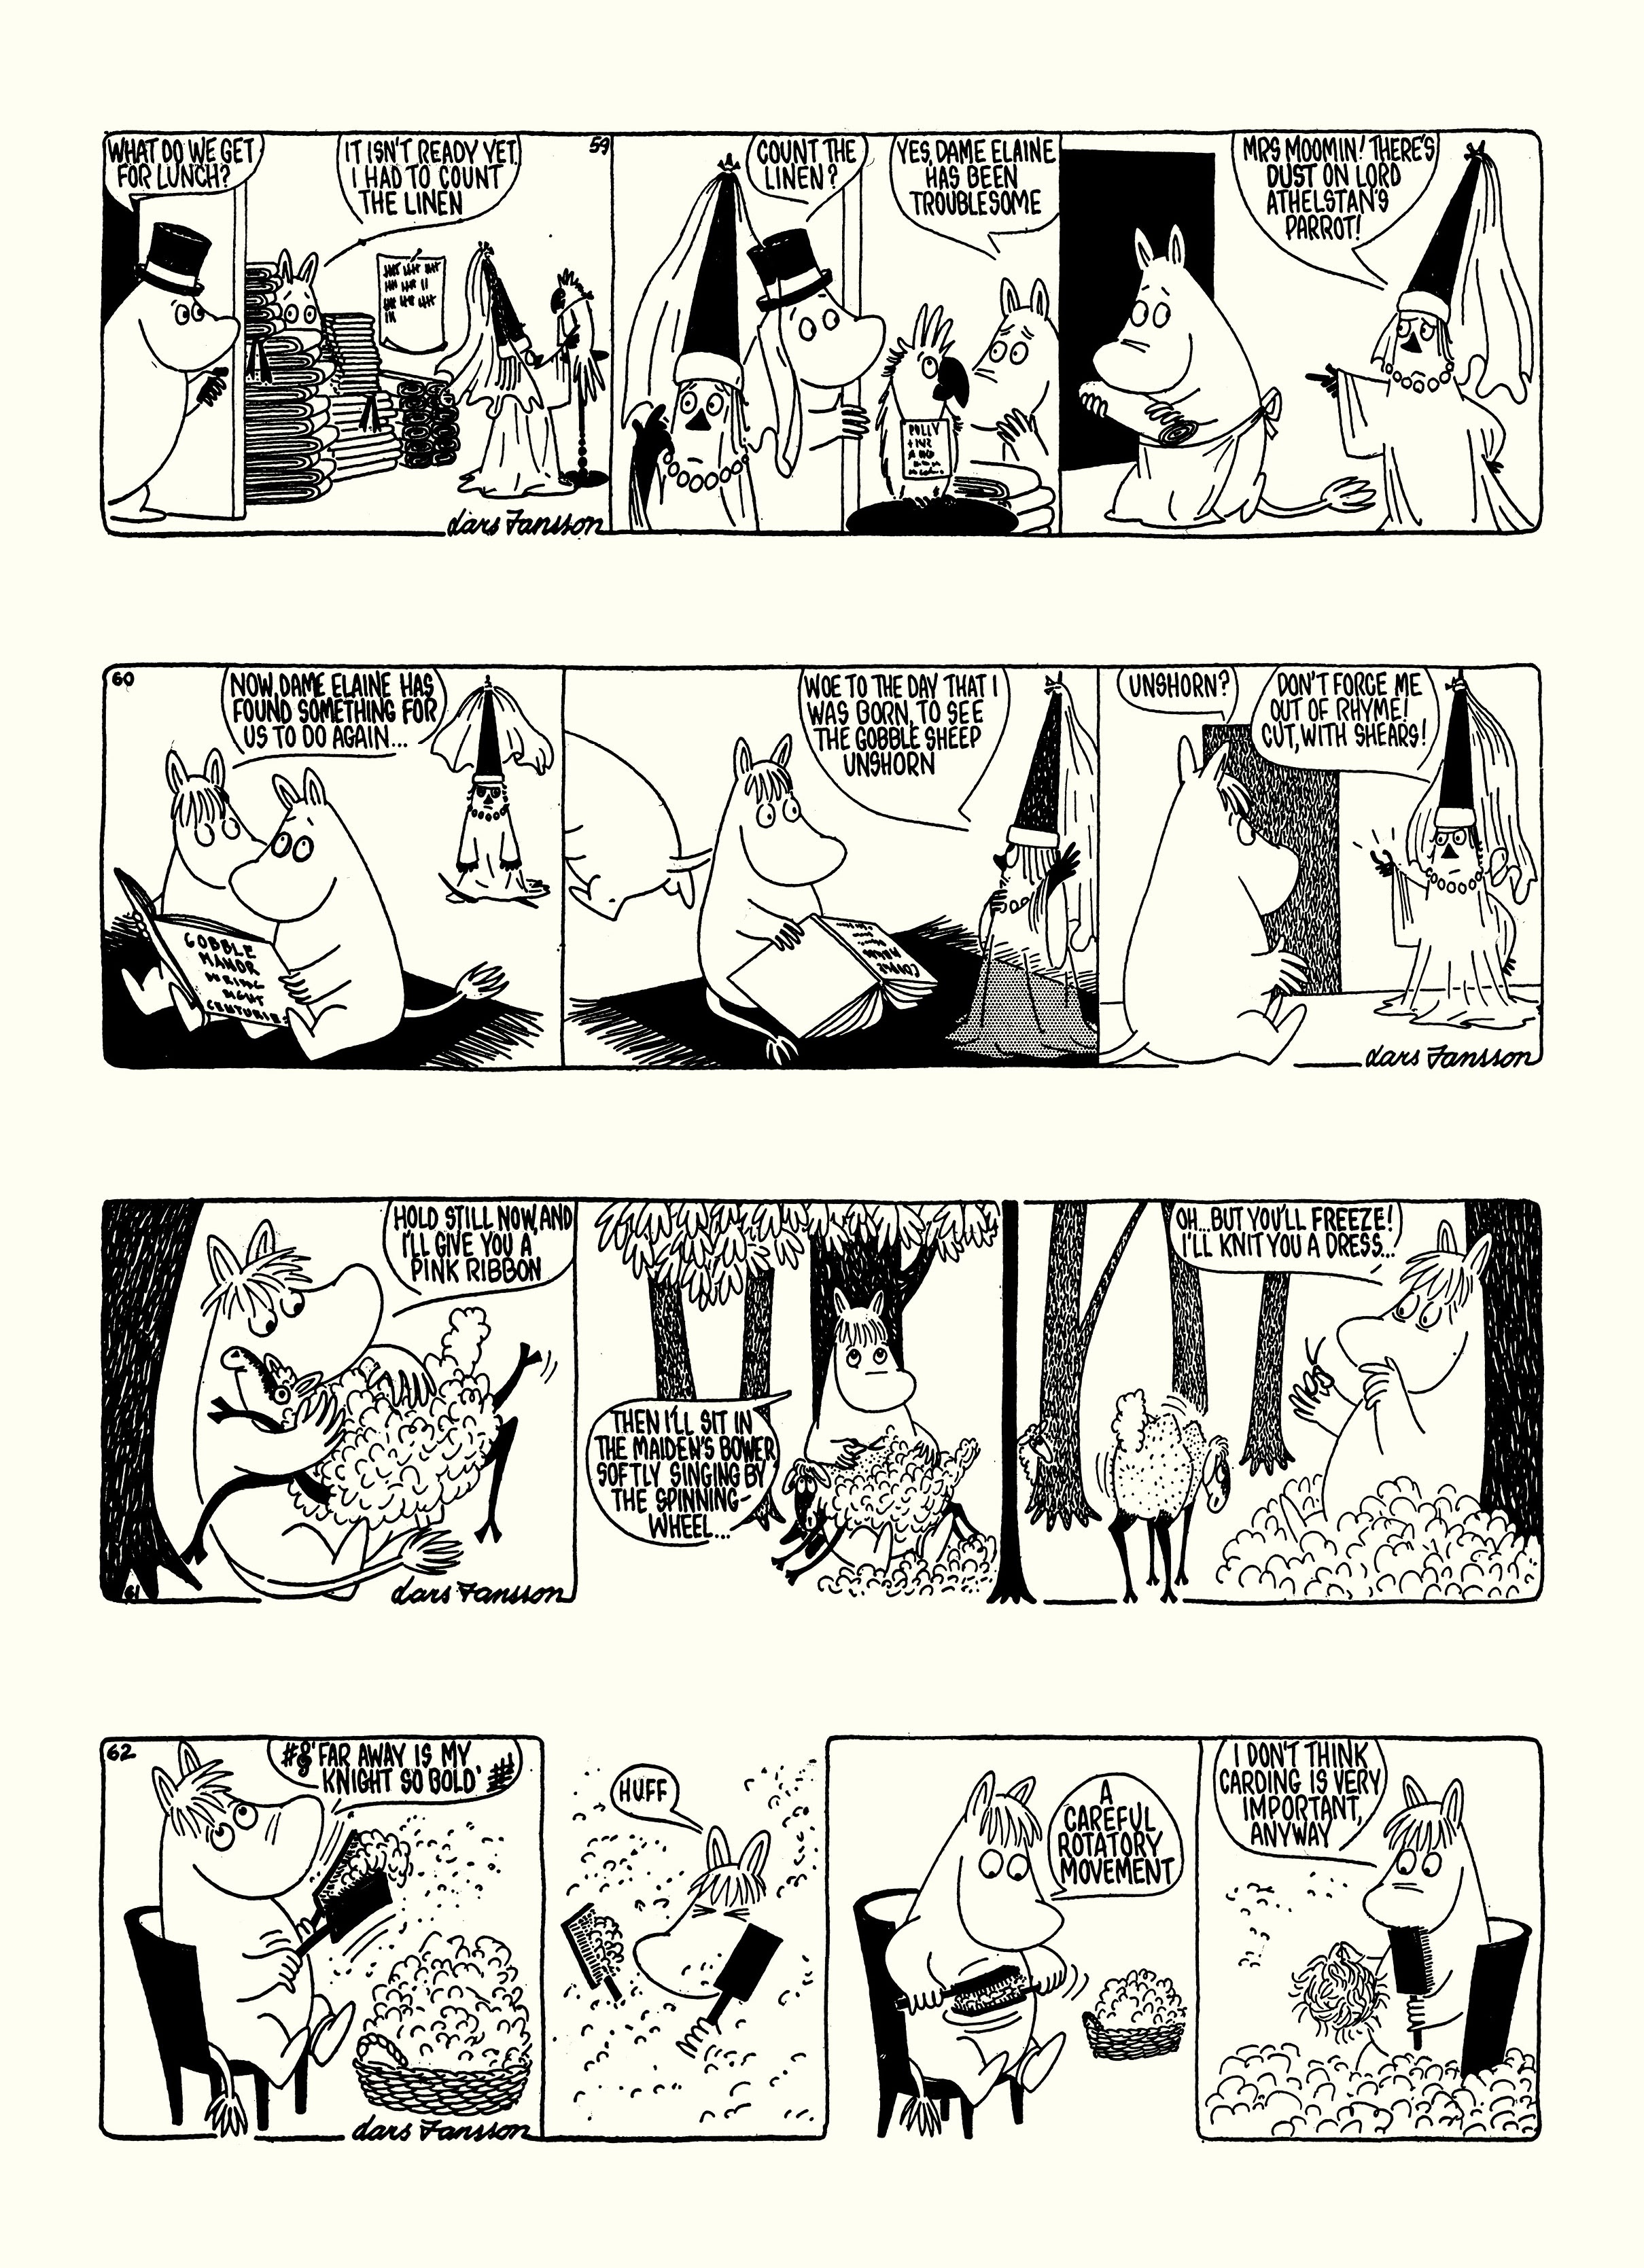 Read online Moomin: The Complete Lars Jansson Comic Strip comic -  Issue # TPB 7 - 63